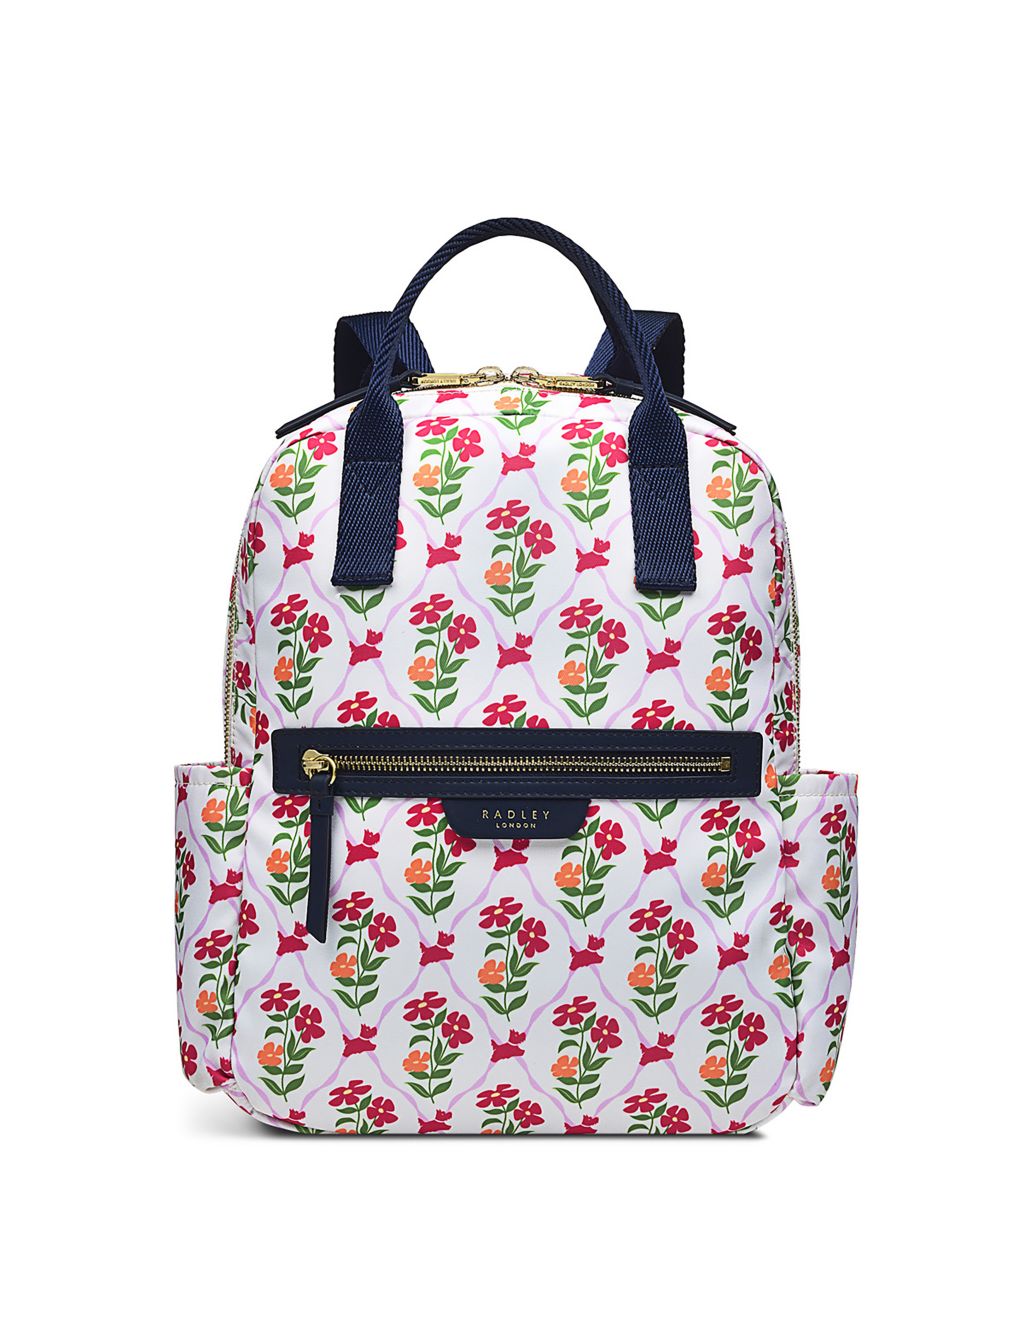 Finsbury Park Floral Backpack 1 of 5